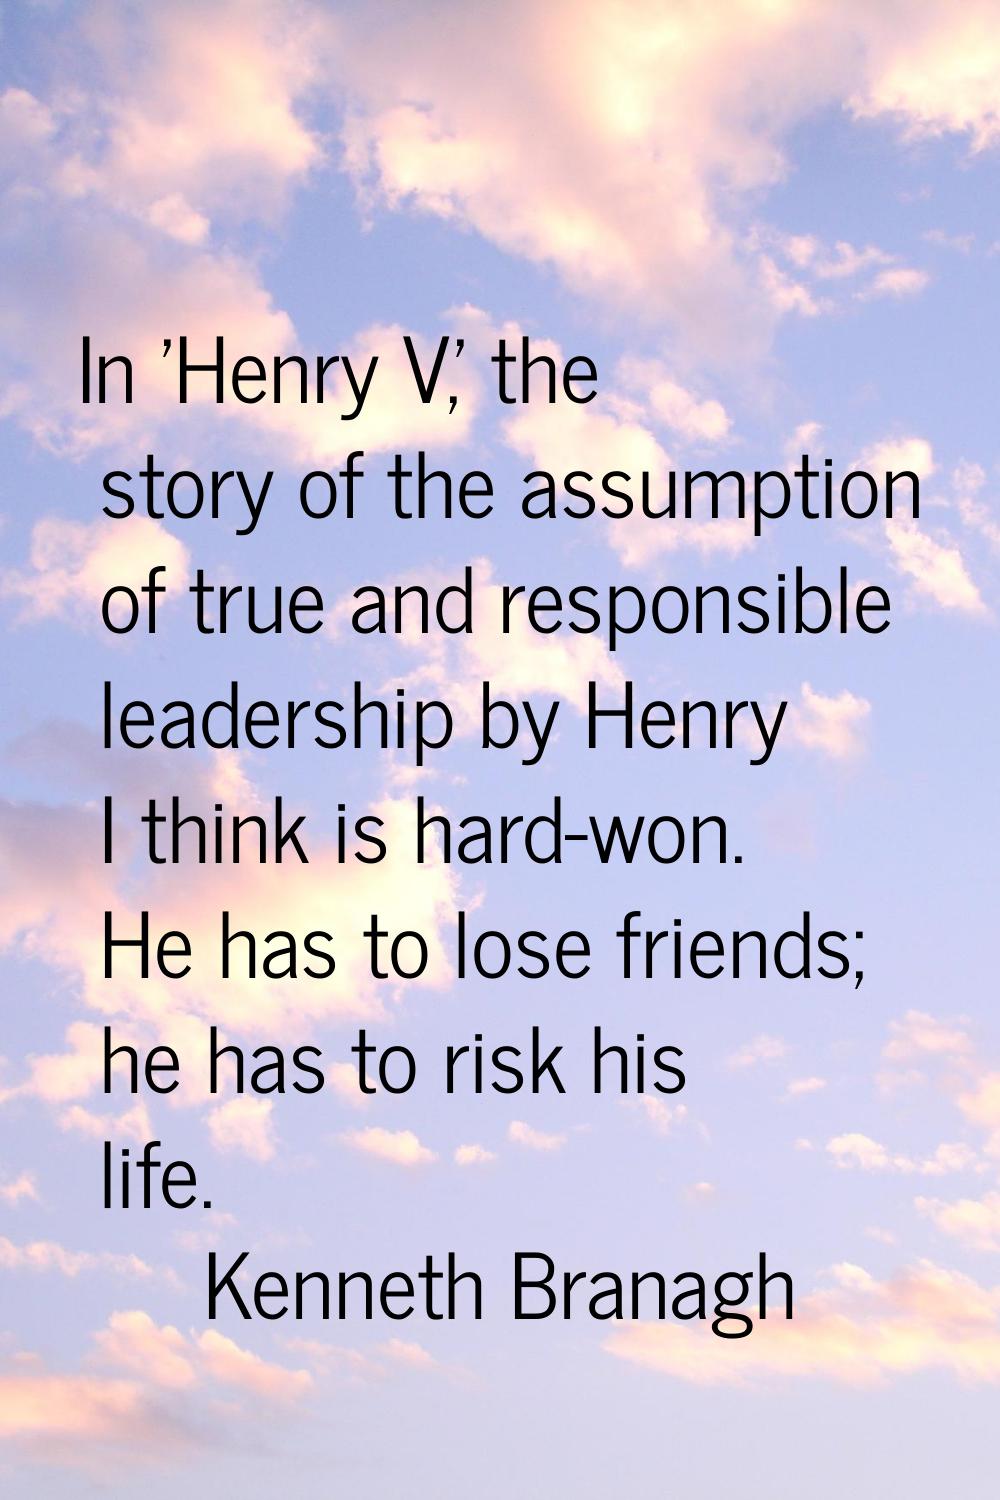 In 'Henry V,' the story of the assumption of true and responsible leadership by Henry I think is ha